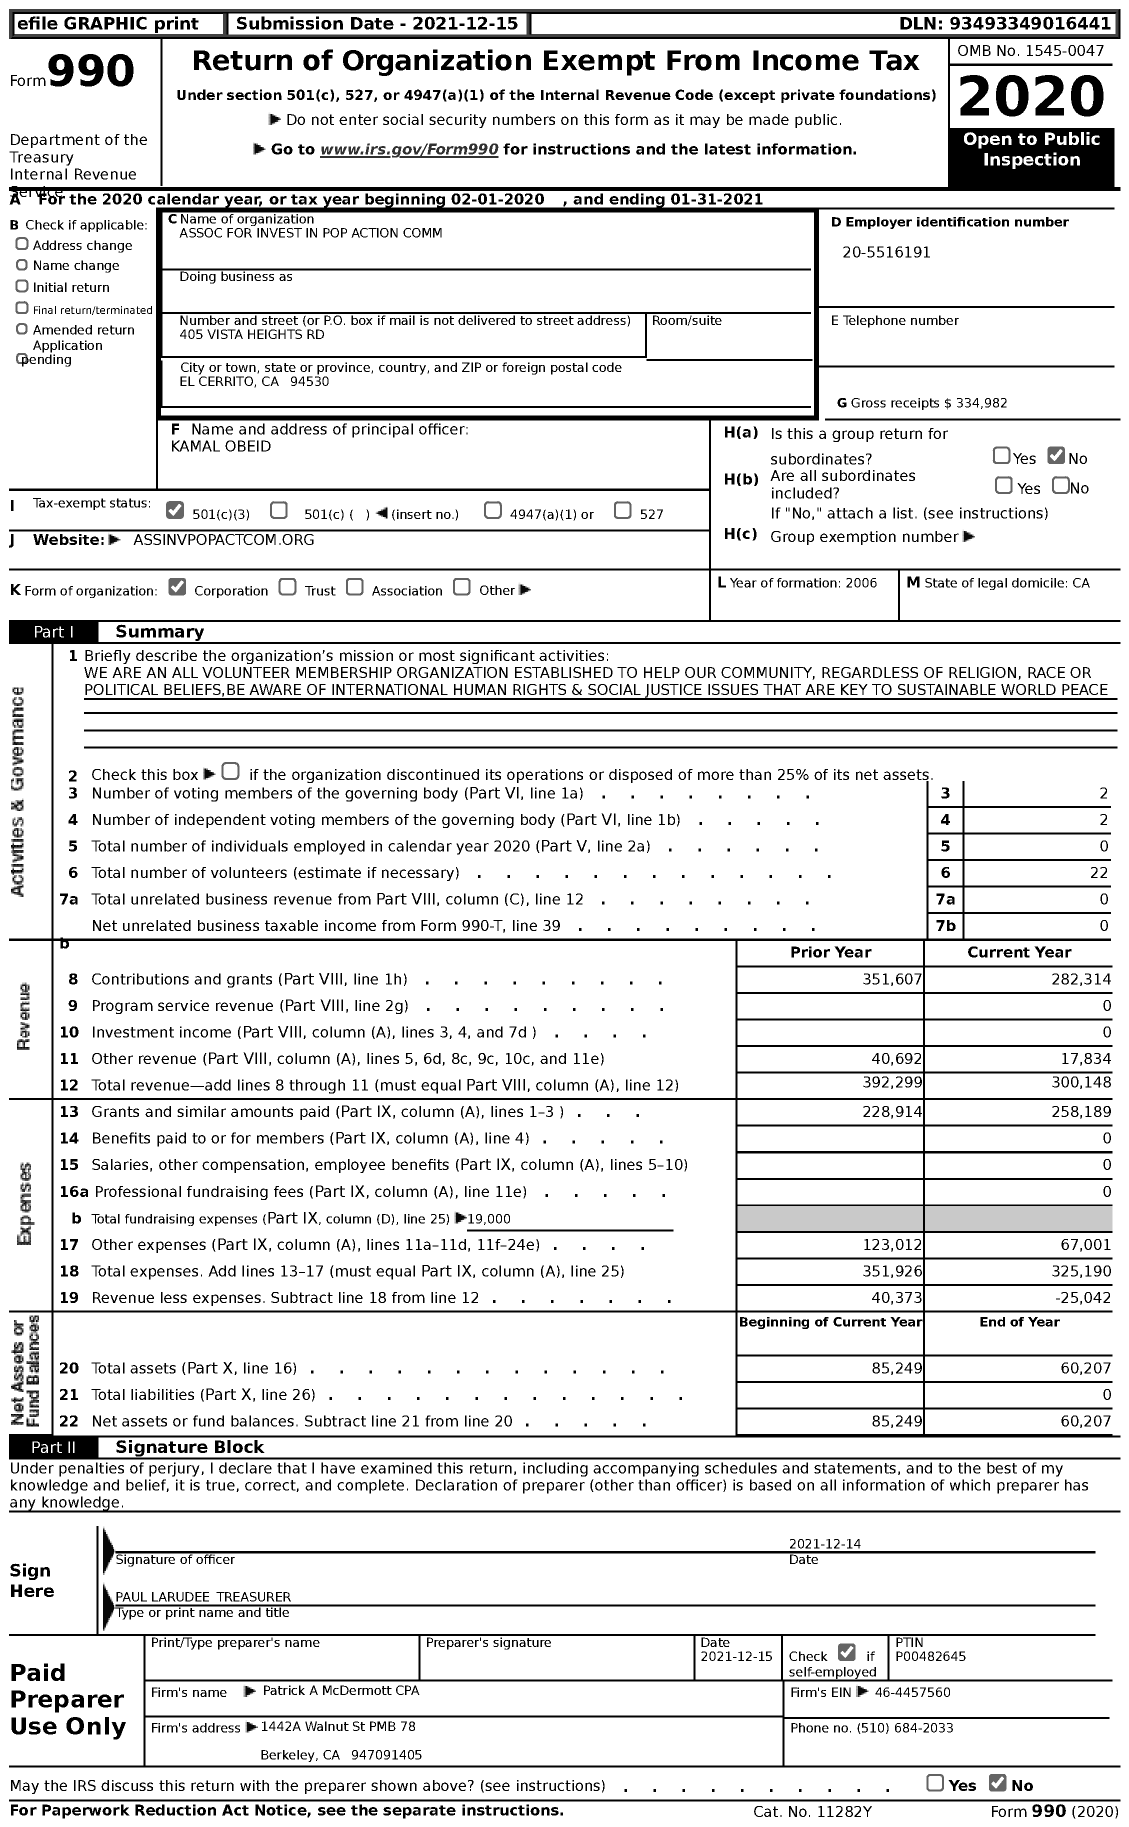 Image of first page of 2020 Form 990 for Association for Investment in Popular Action Committees